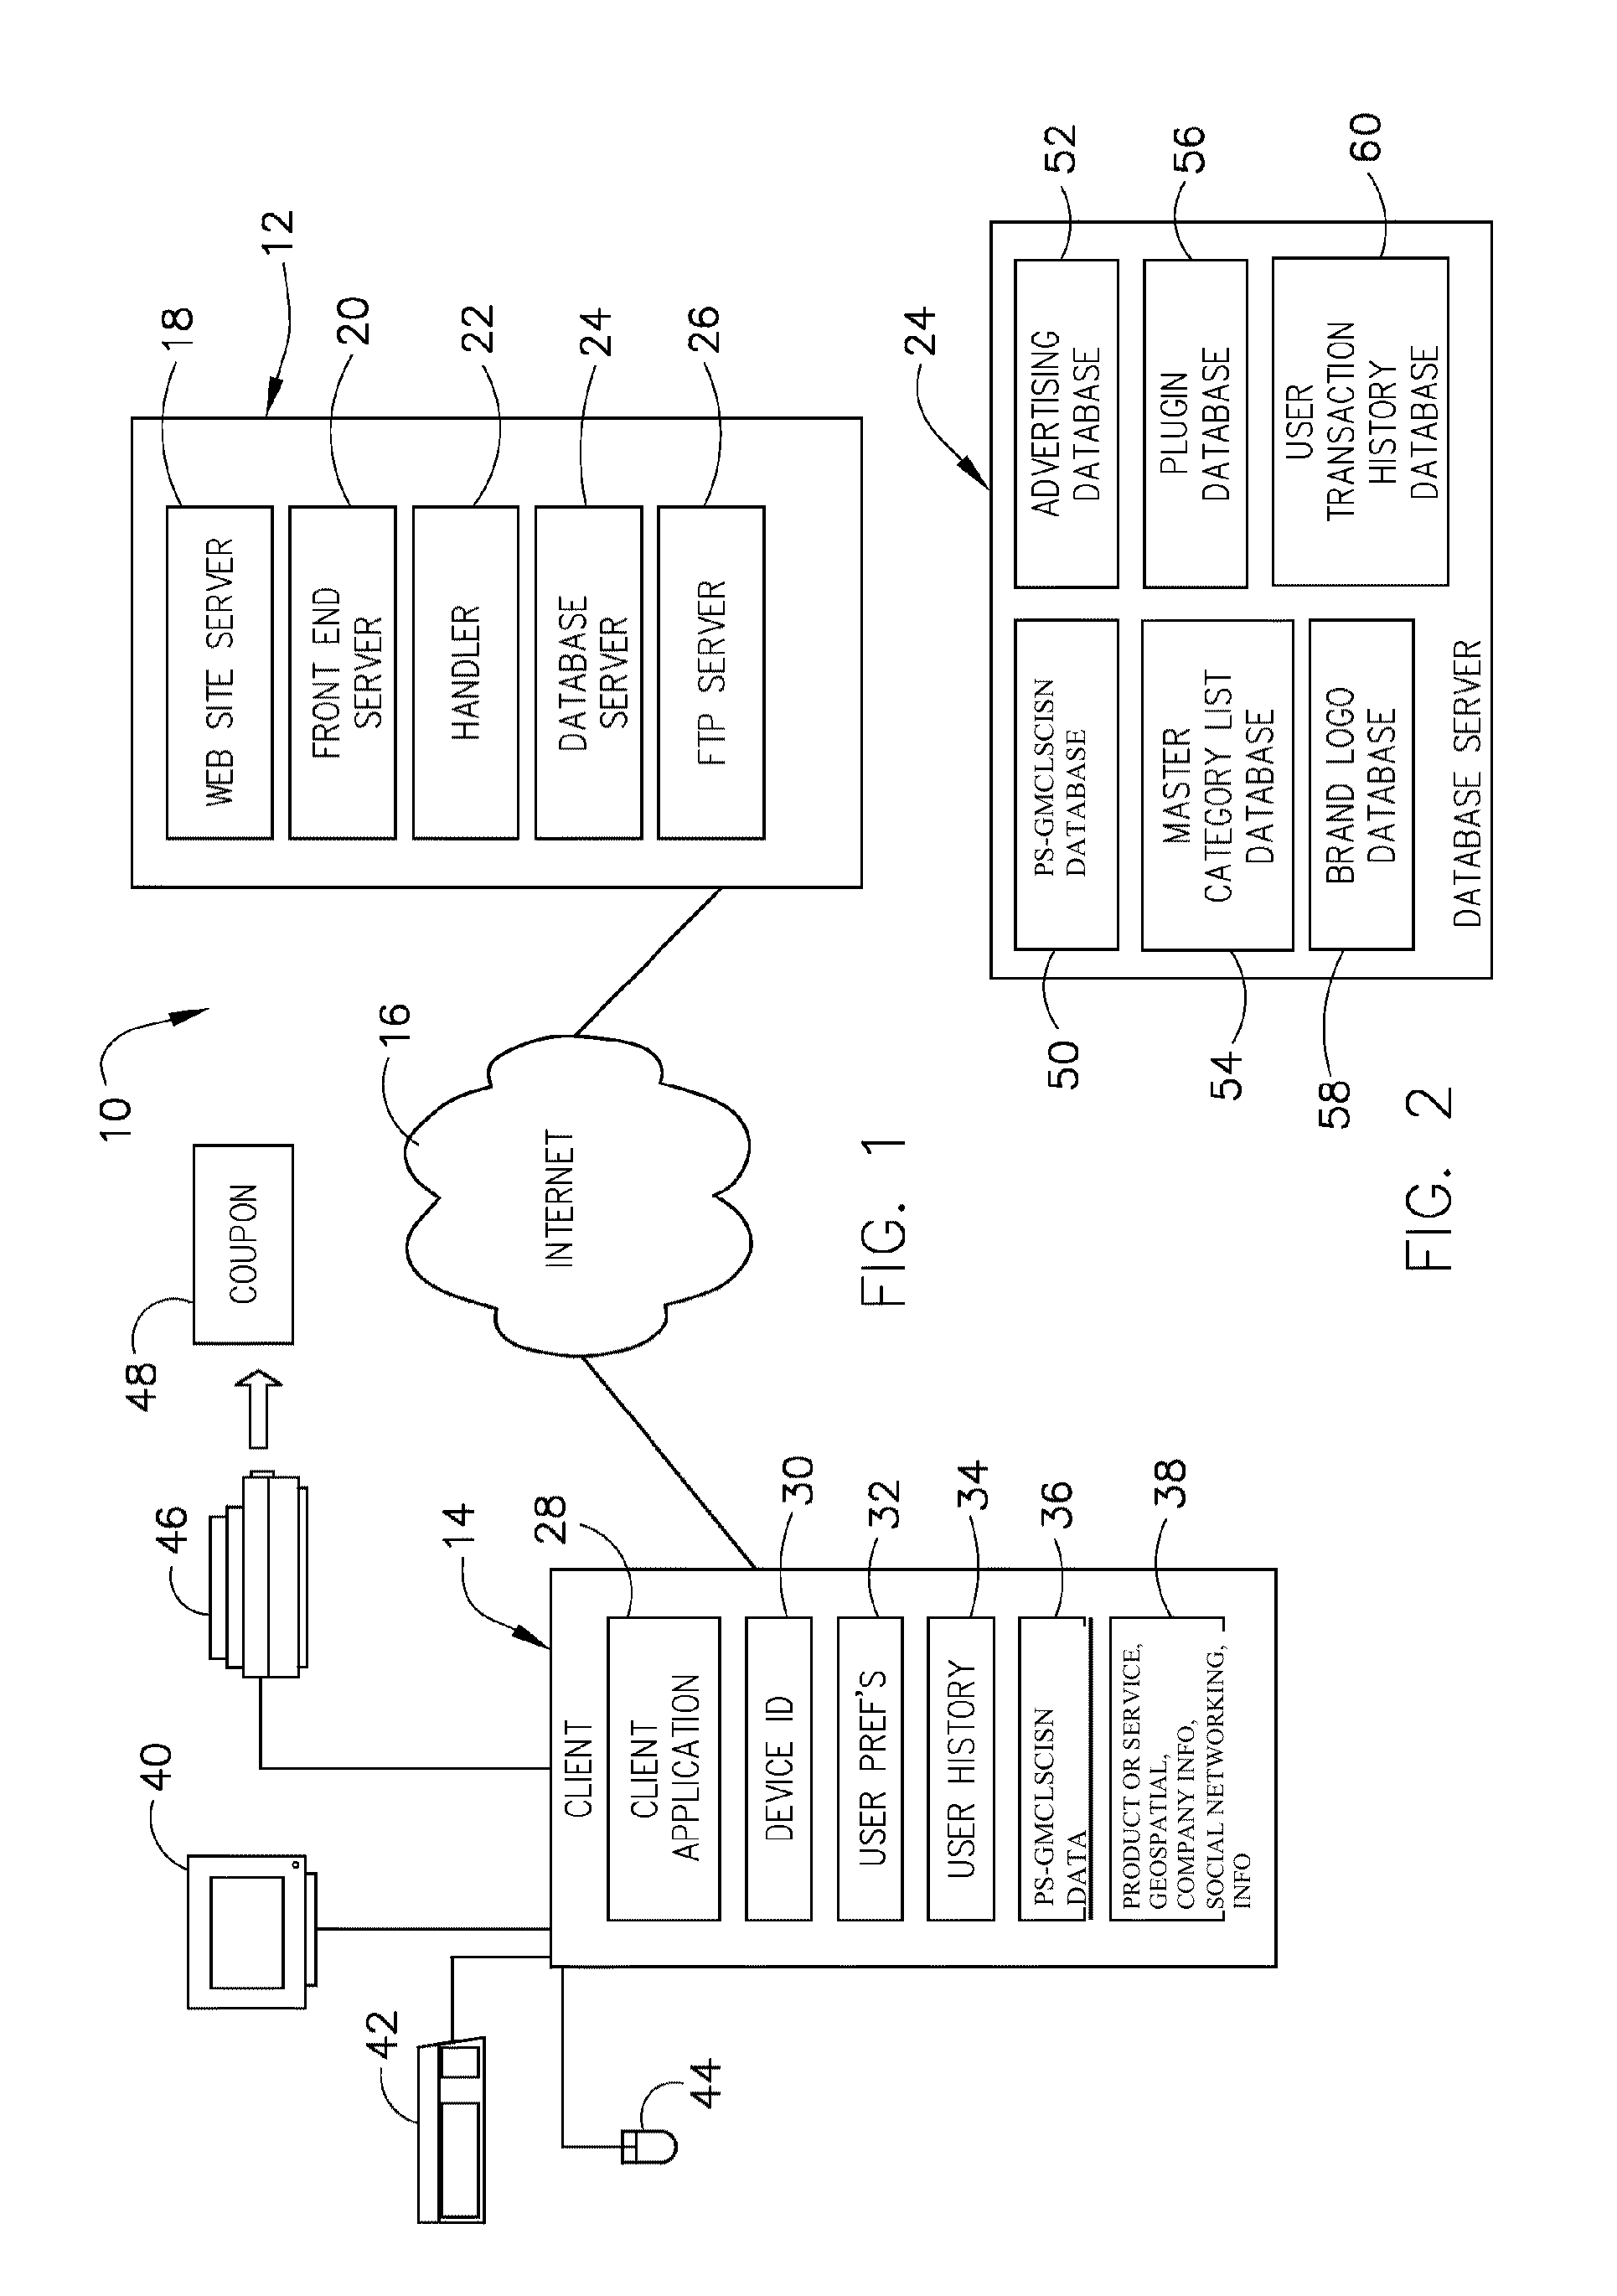 System and method for tracking, utilizing predicting, and implementing online consumer browsing behavior, buying patterns, social networking communications, advertisements and communications, for online coupons, products, goods & services, auctions, and service providers using geospatial mapping technology, and social networking